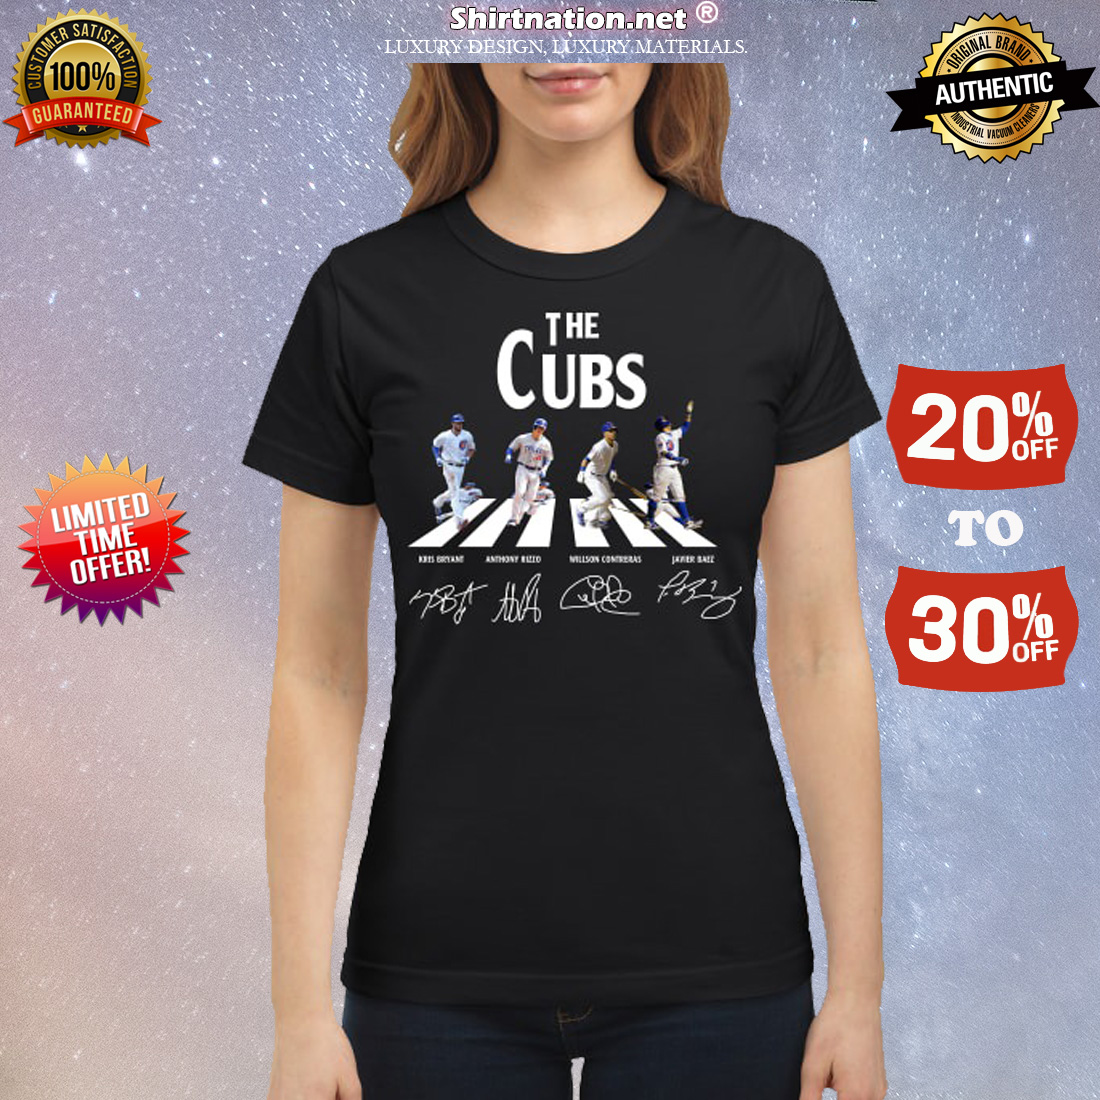 The Cubs abbey road classic shirt